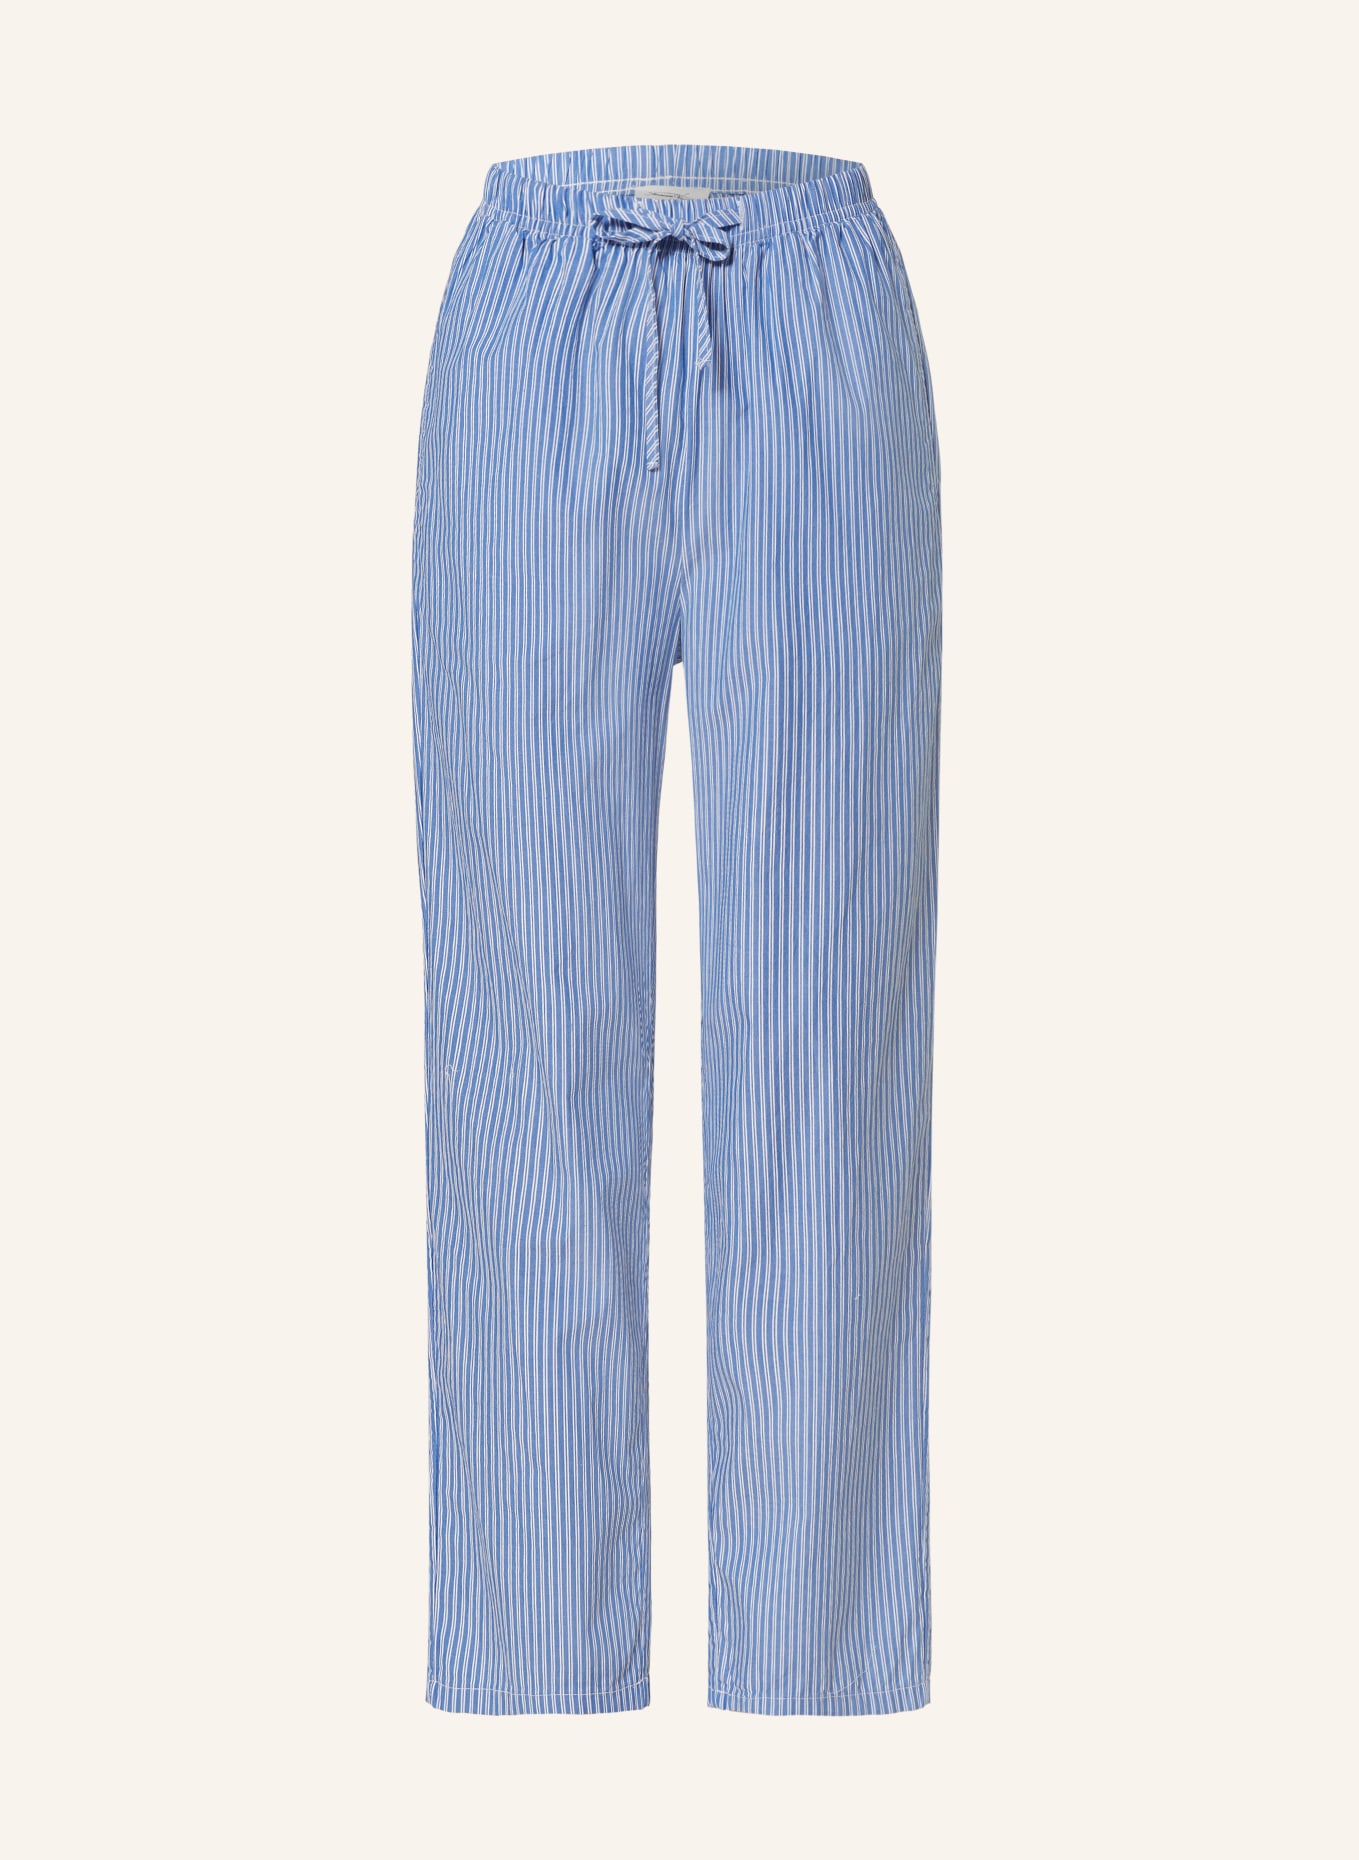 American Vintage 7/8 trousers ZATYBAY, Color: BLUE/ WHITE (Image 1)